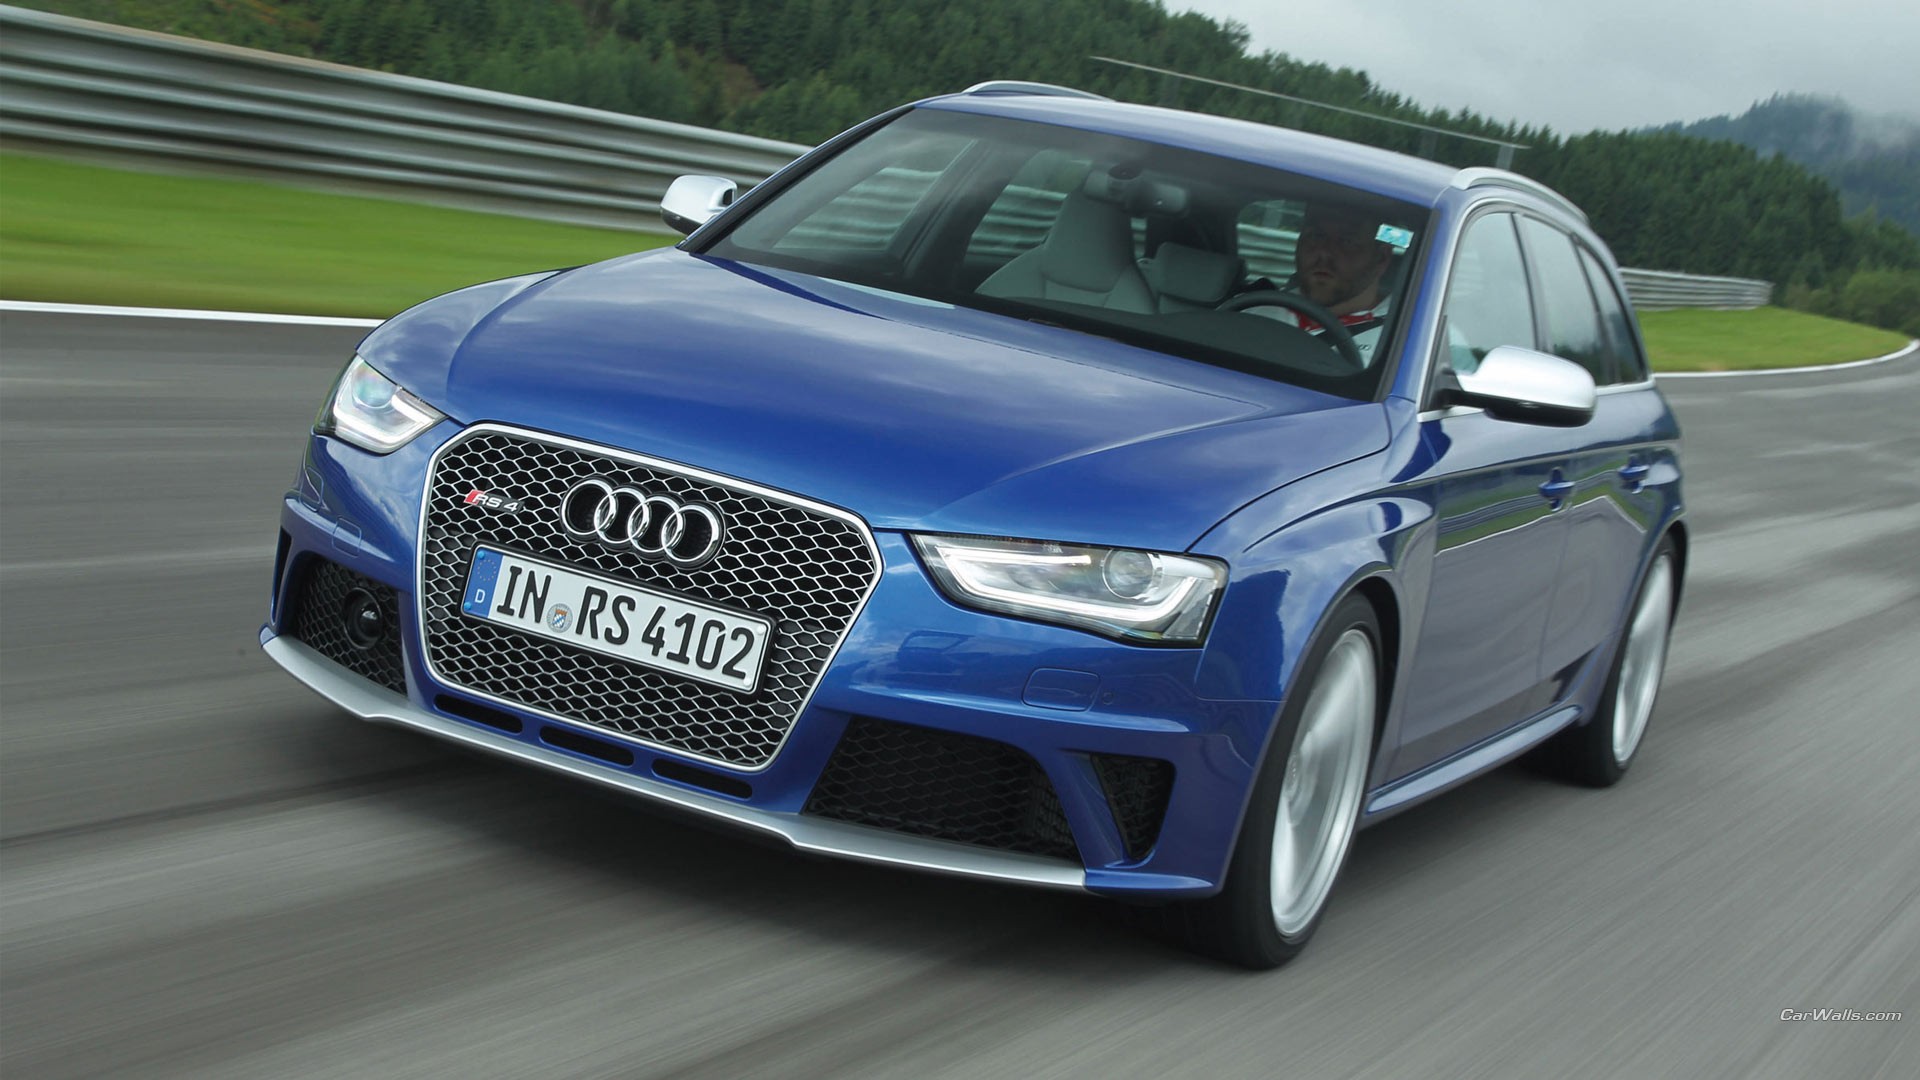 General 1920x1080 Audi RS4 car Audi station wagon blue cars vehicle German cars Volkswagen Group